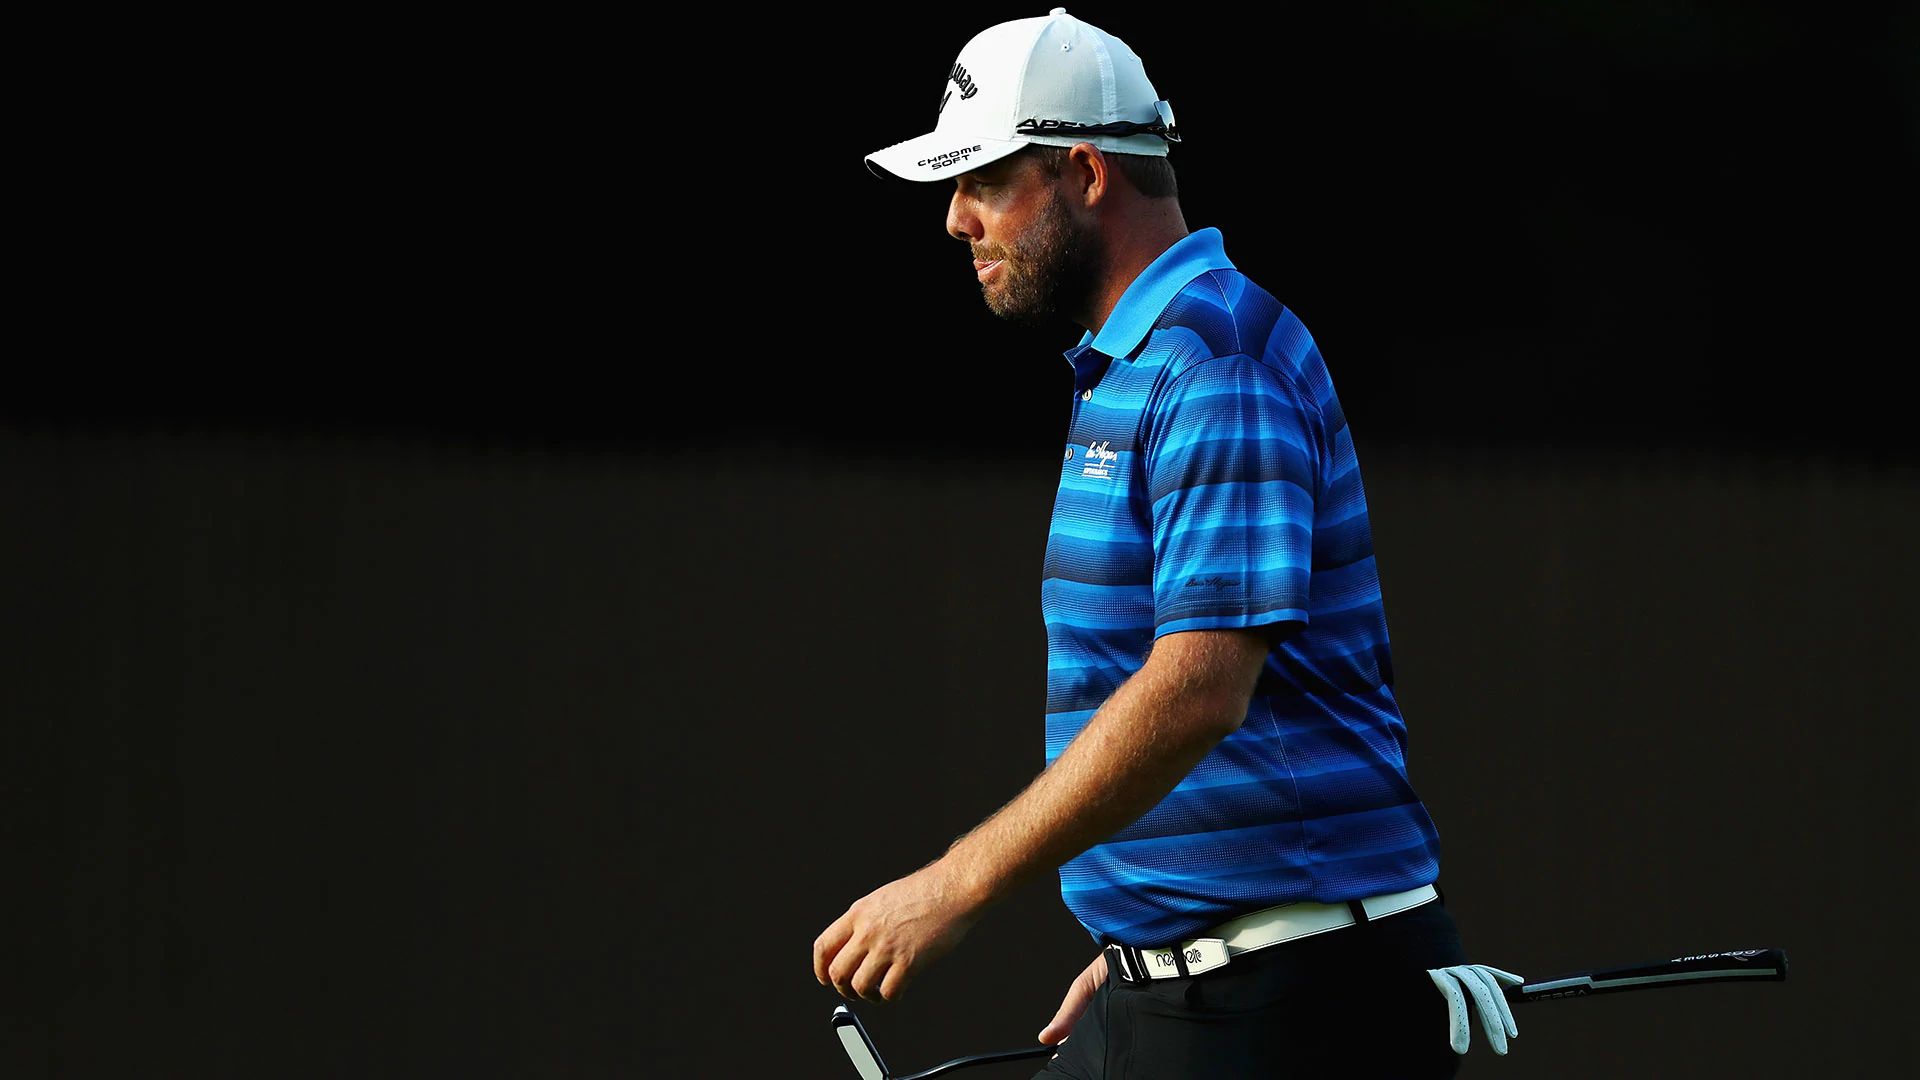 Leishman's putting work pays off with 67